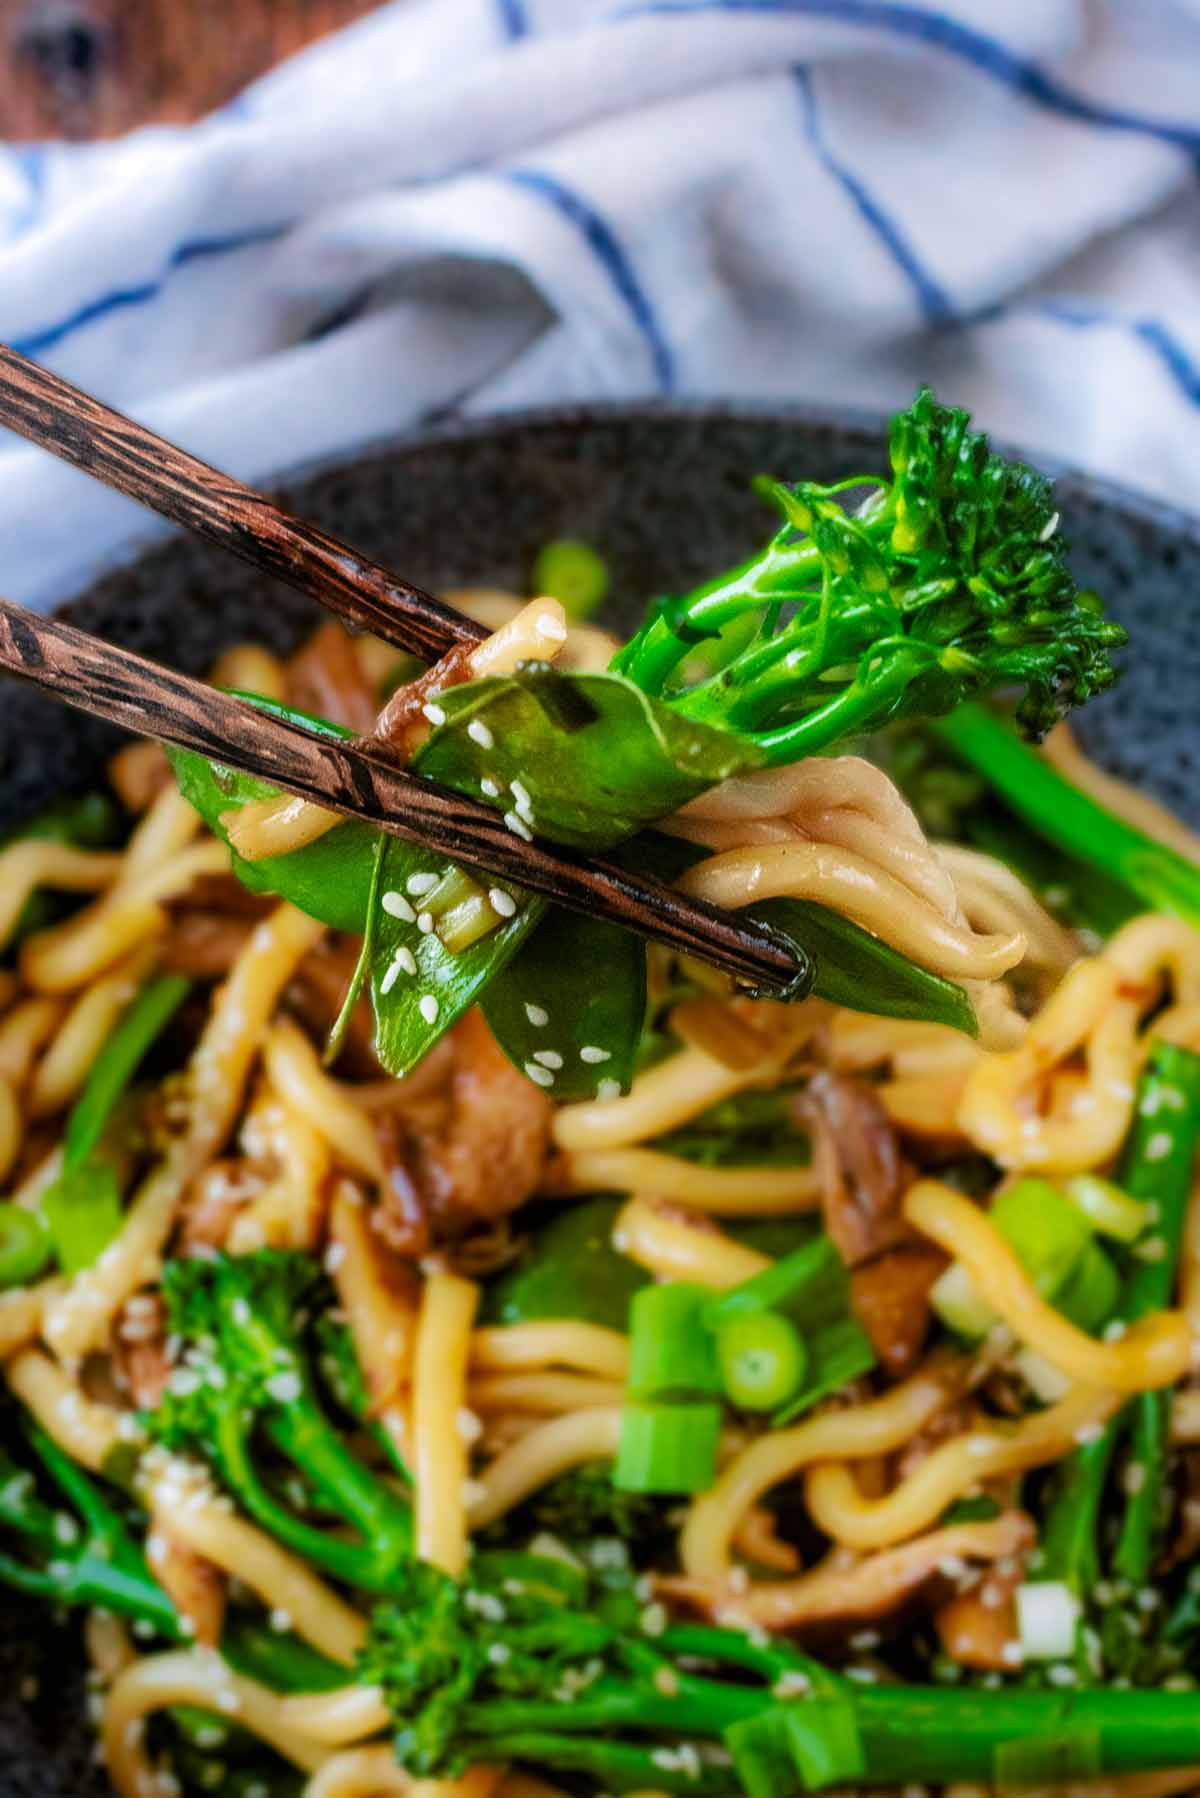 A pair of chopsticks picking up some broccoli and noodles from a bowl.